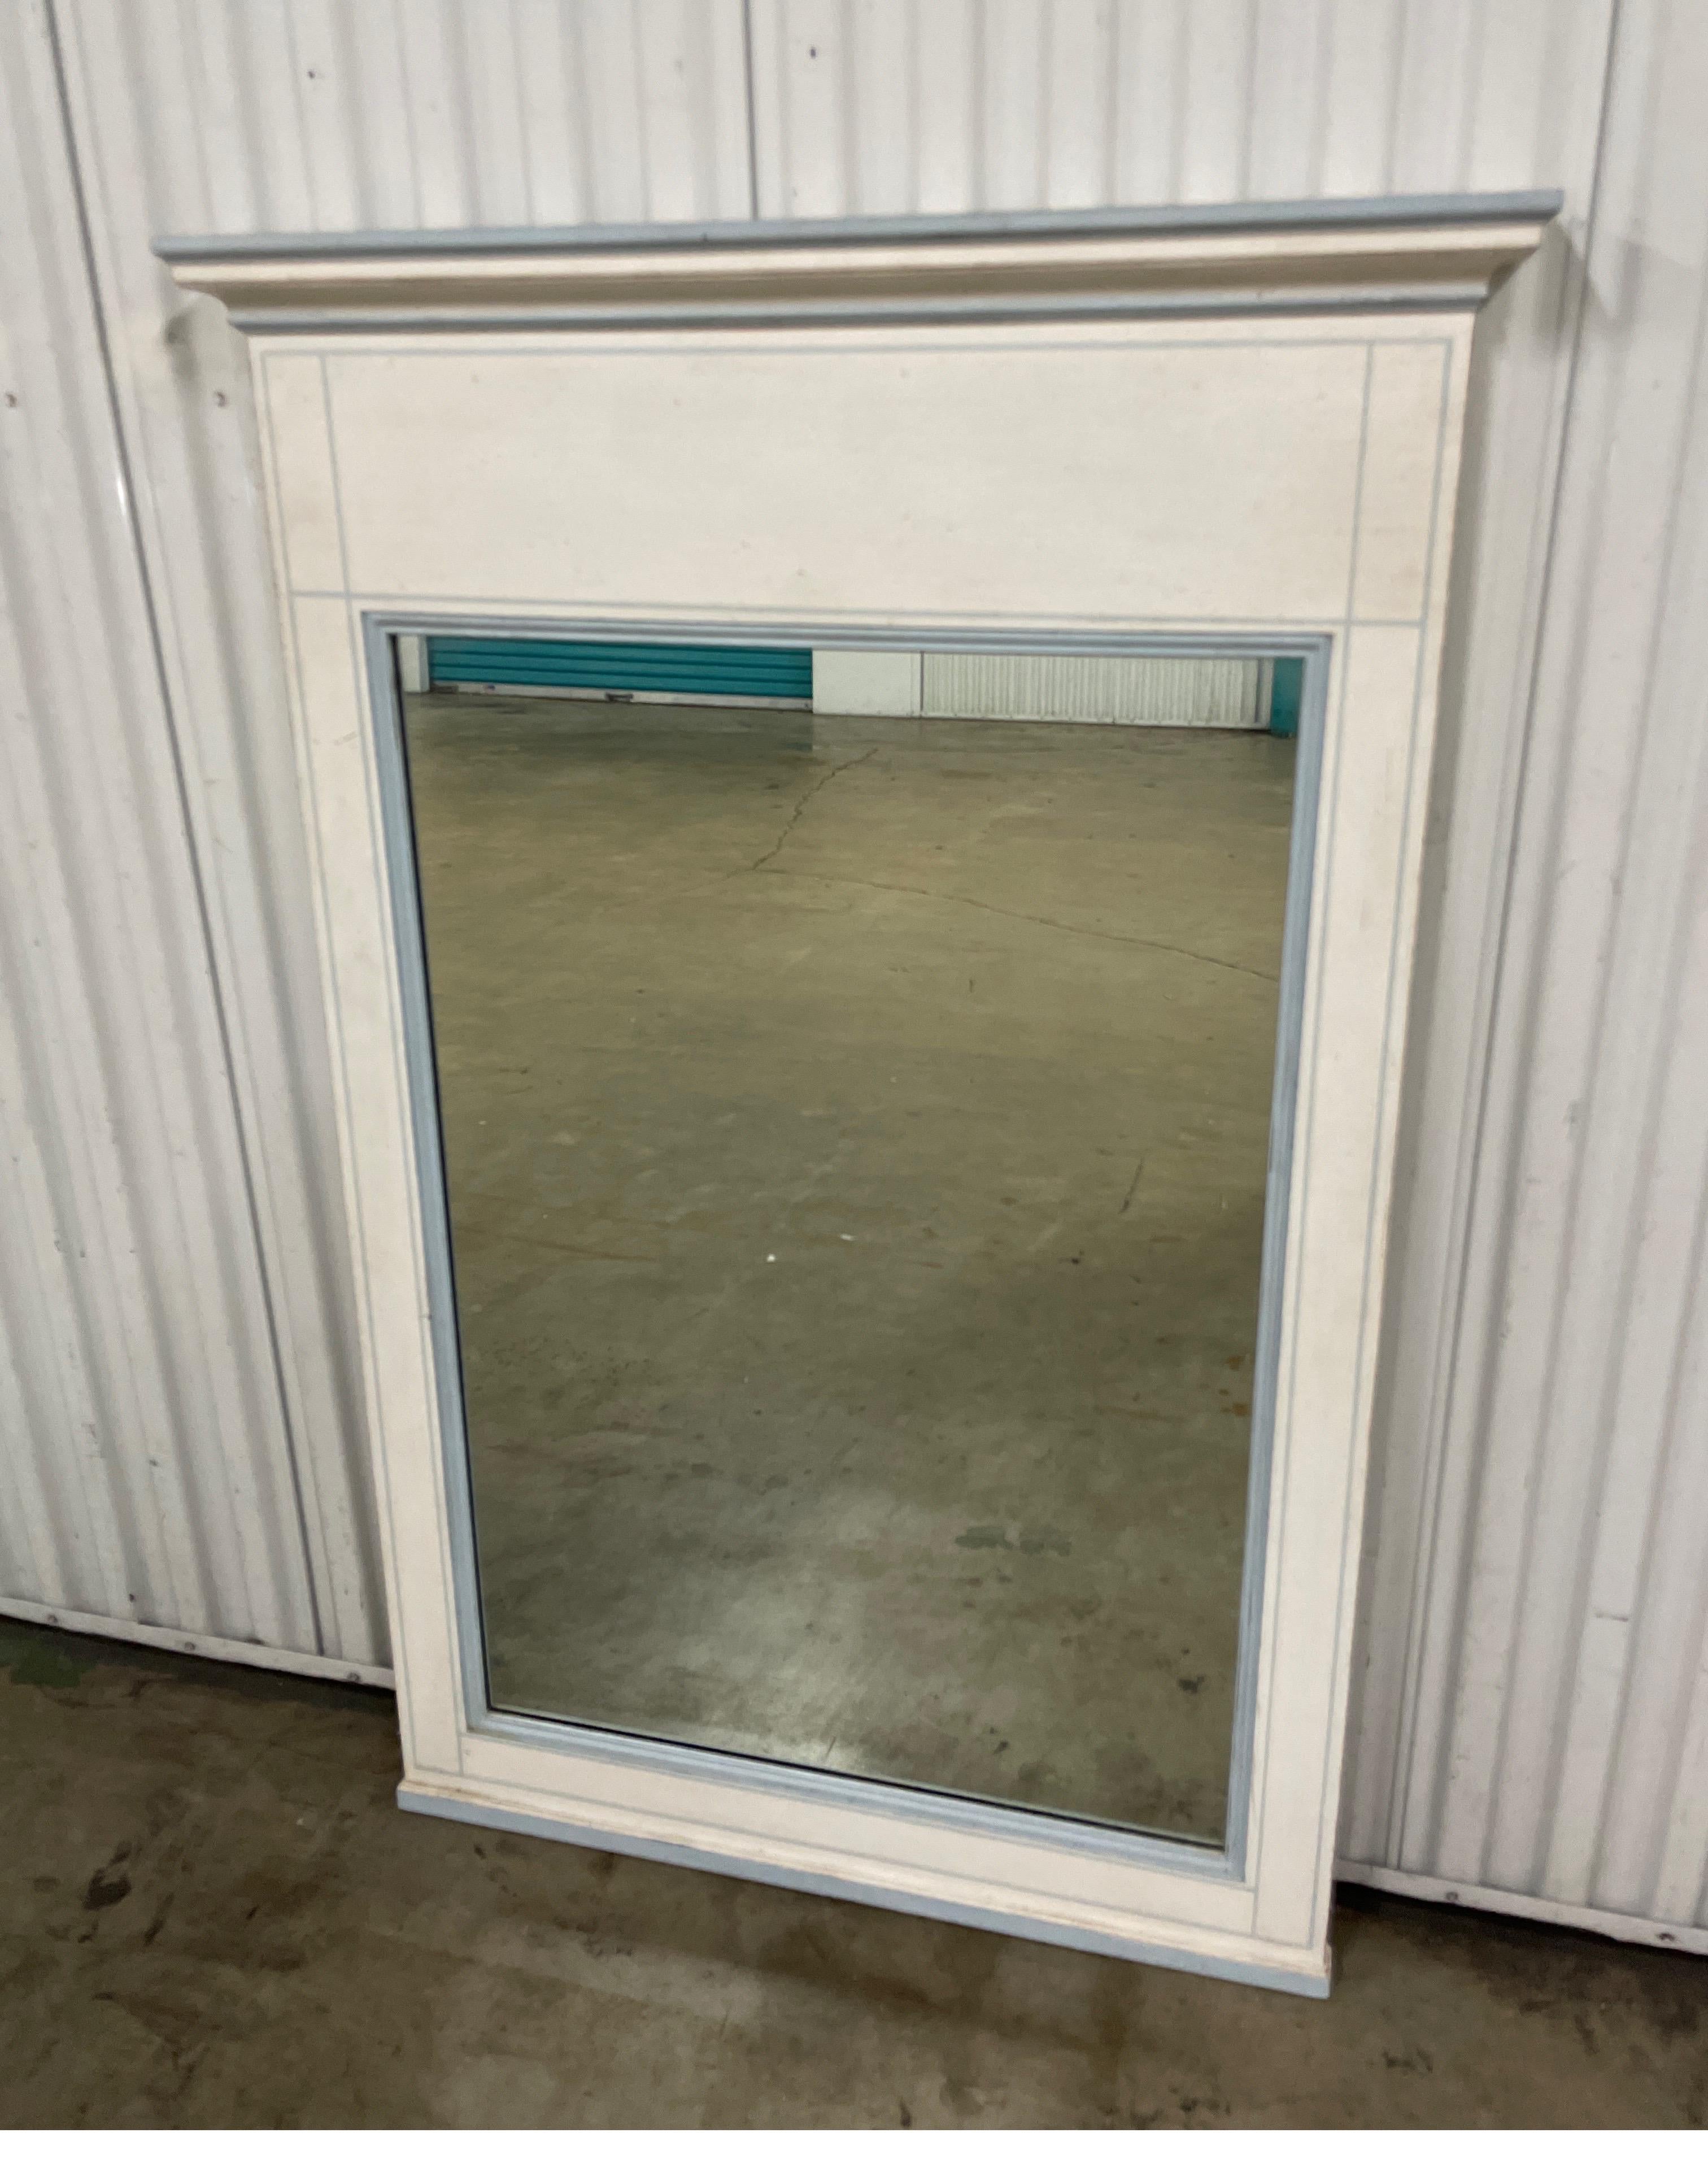 Neoclassical style painted trumeau mirror by John Widdicomb. It is painted in white with pale blue trim. Simple & elegant.